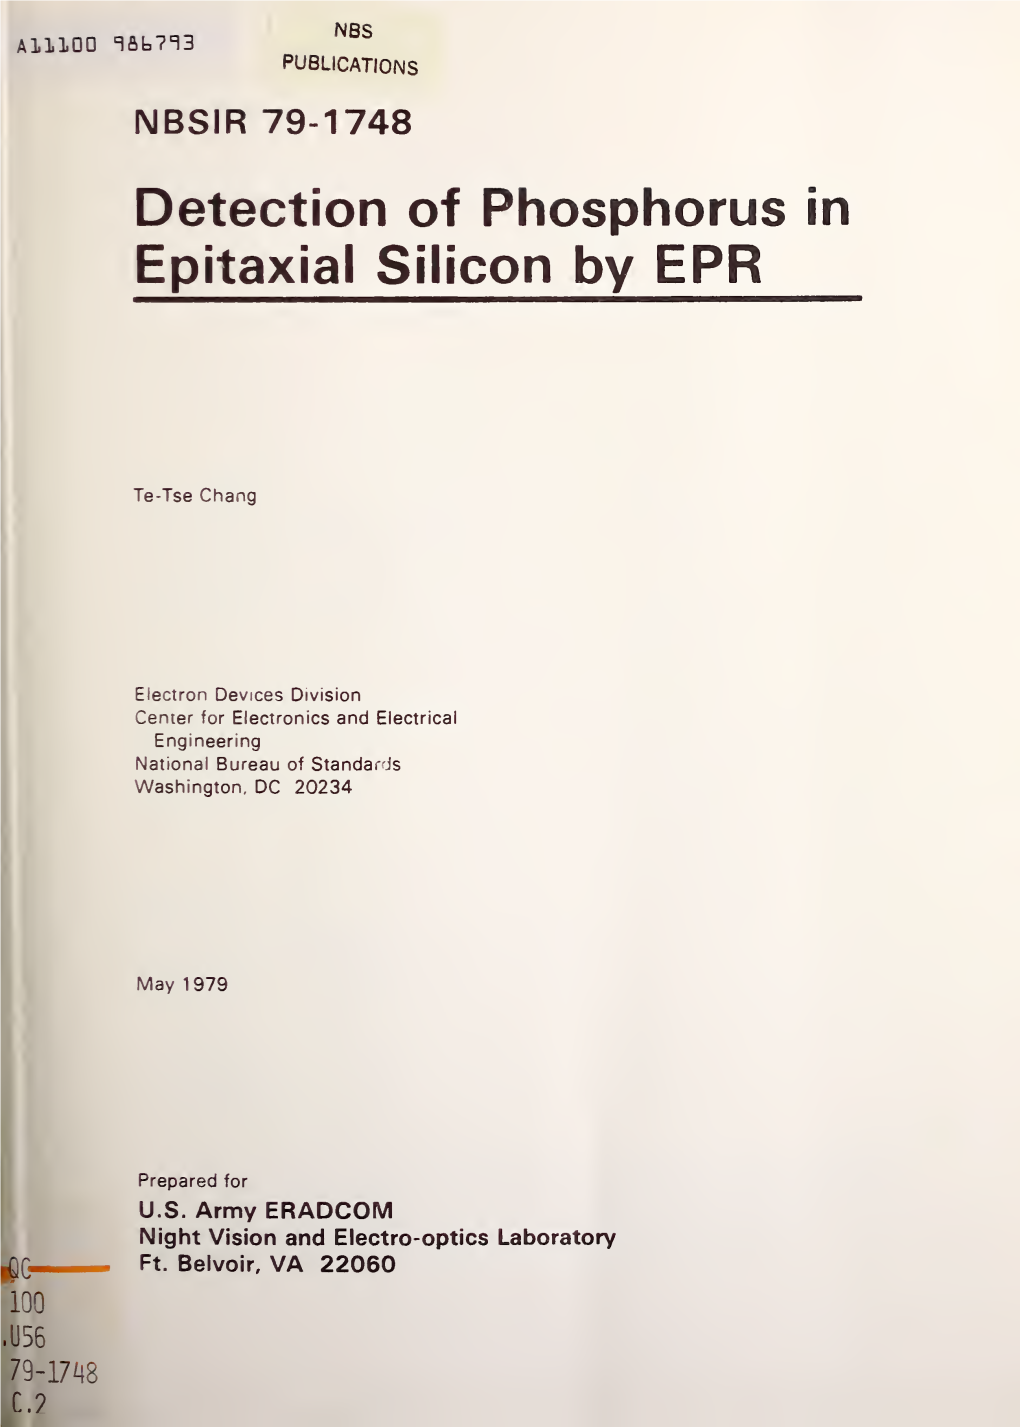 Detection of Phosphorus in Epitaxial Silicon by EPR